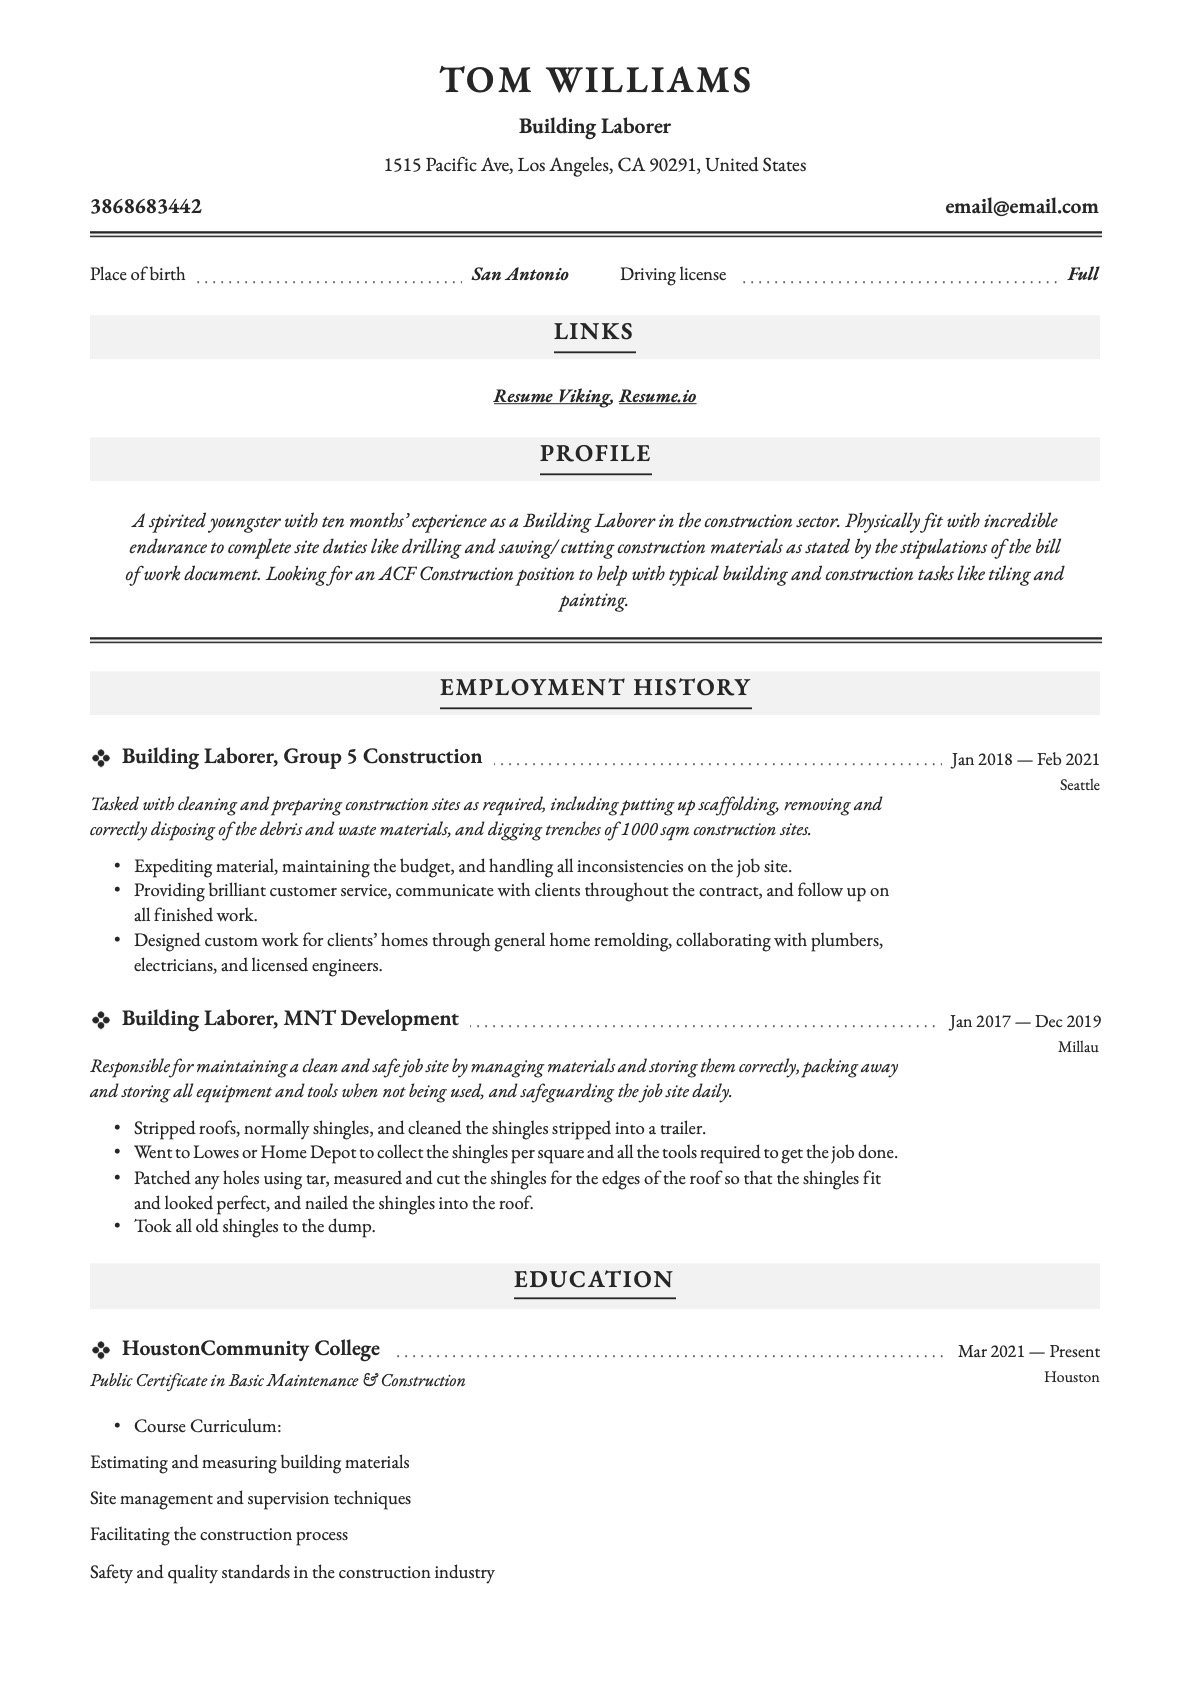 Example Resume Building Laborer-10